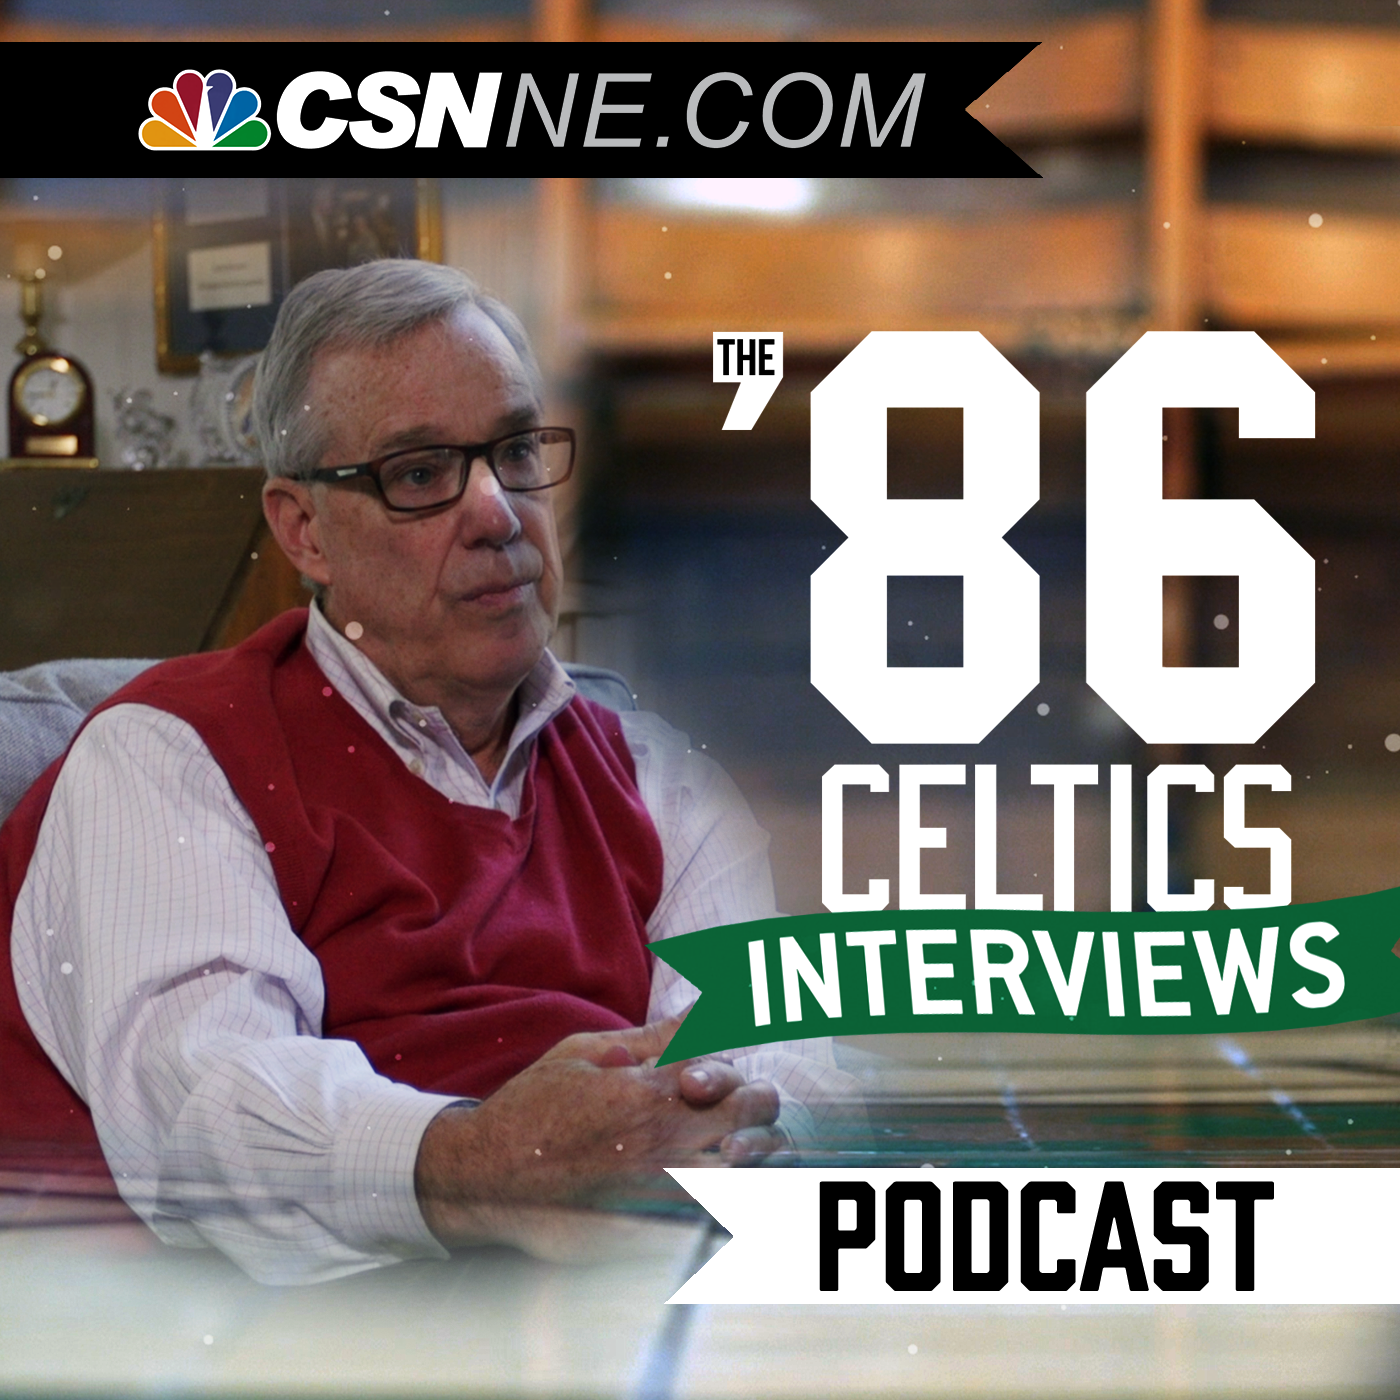 The '86 Celtics Interviews (Ep. 12): Peter May